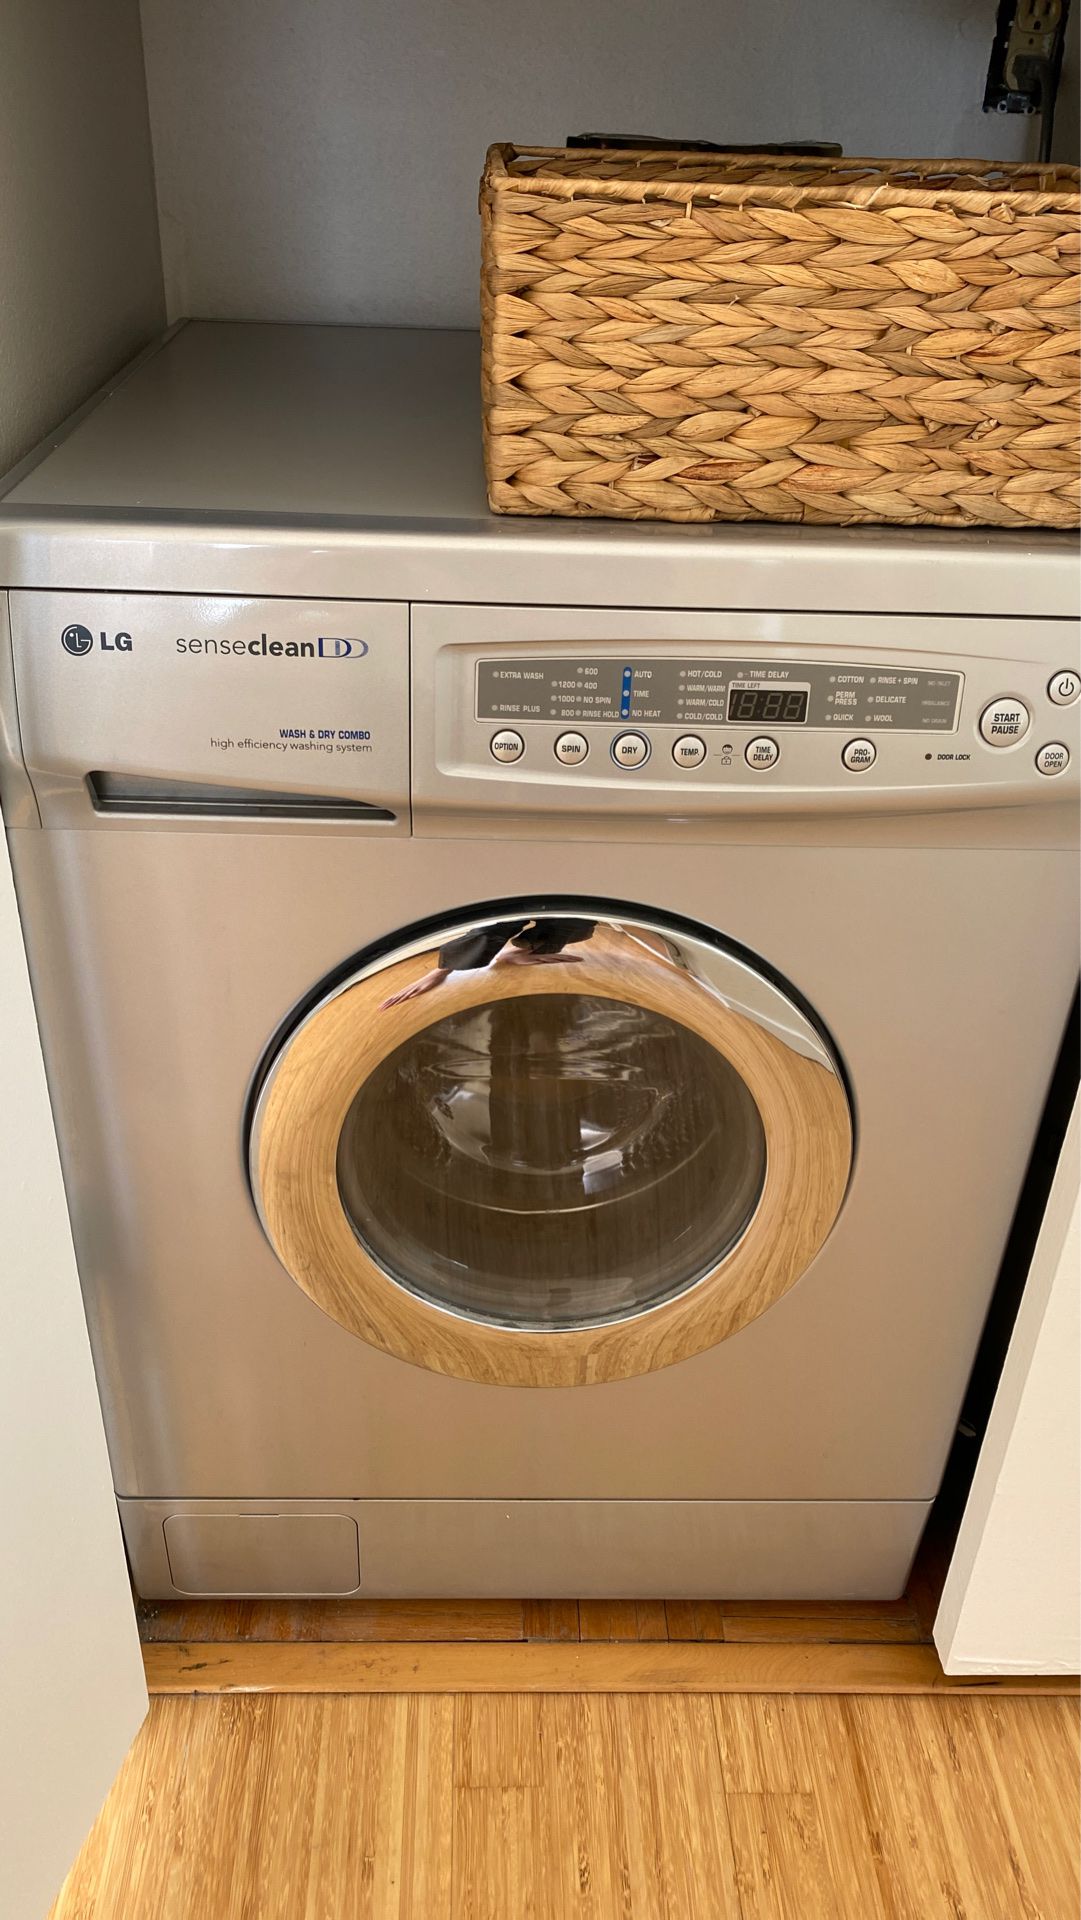 Free LG senseclean washer/dryer combo WD-3245RHD